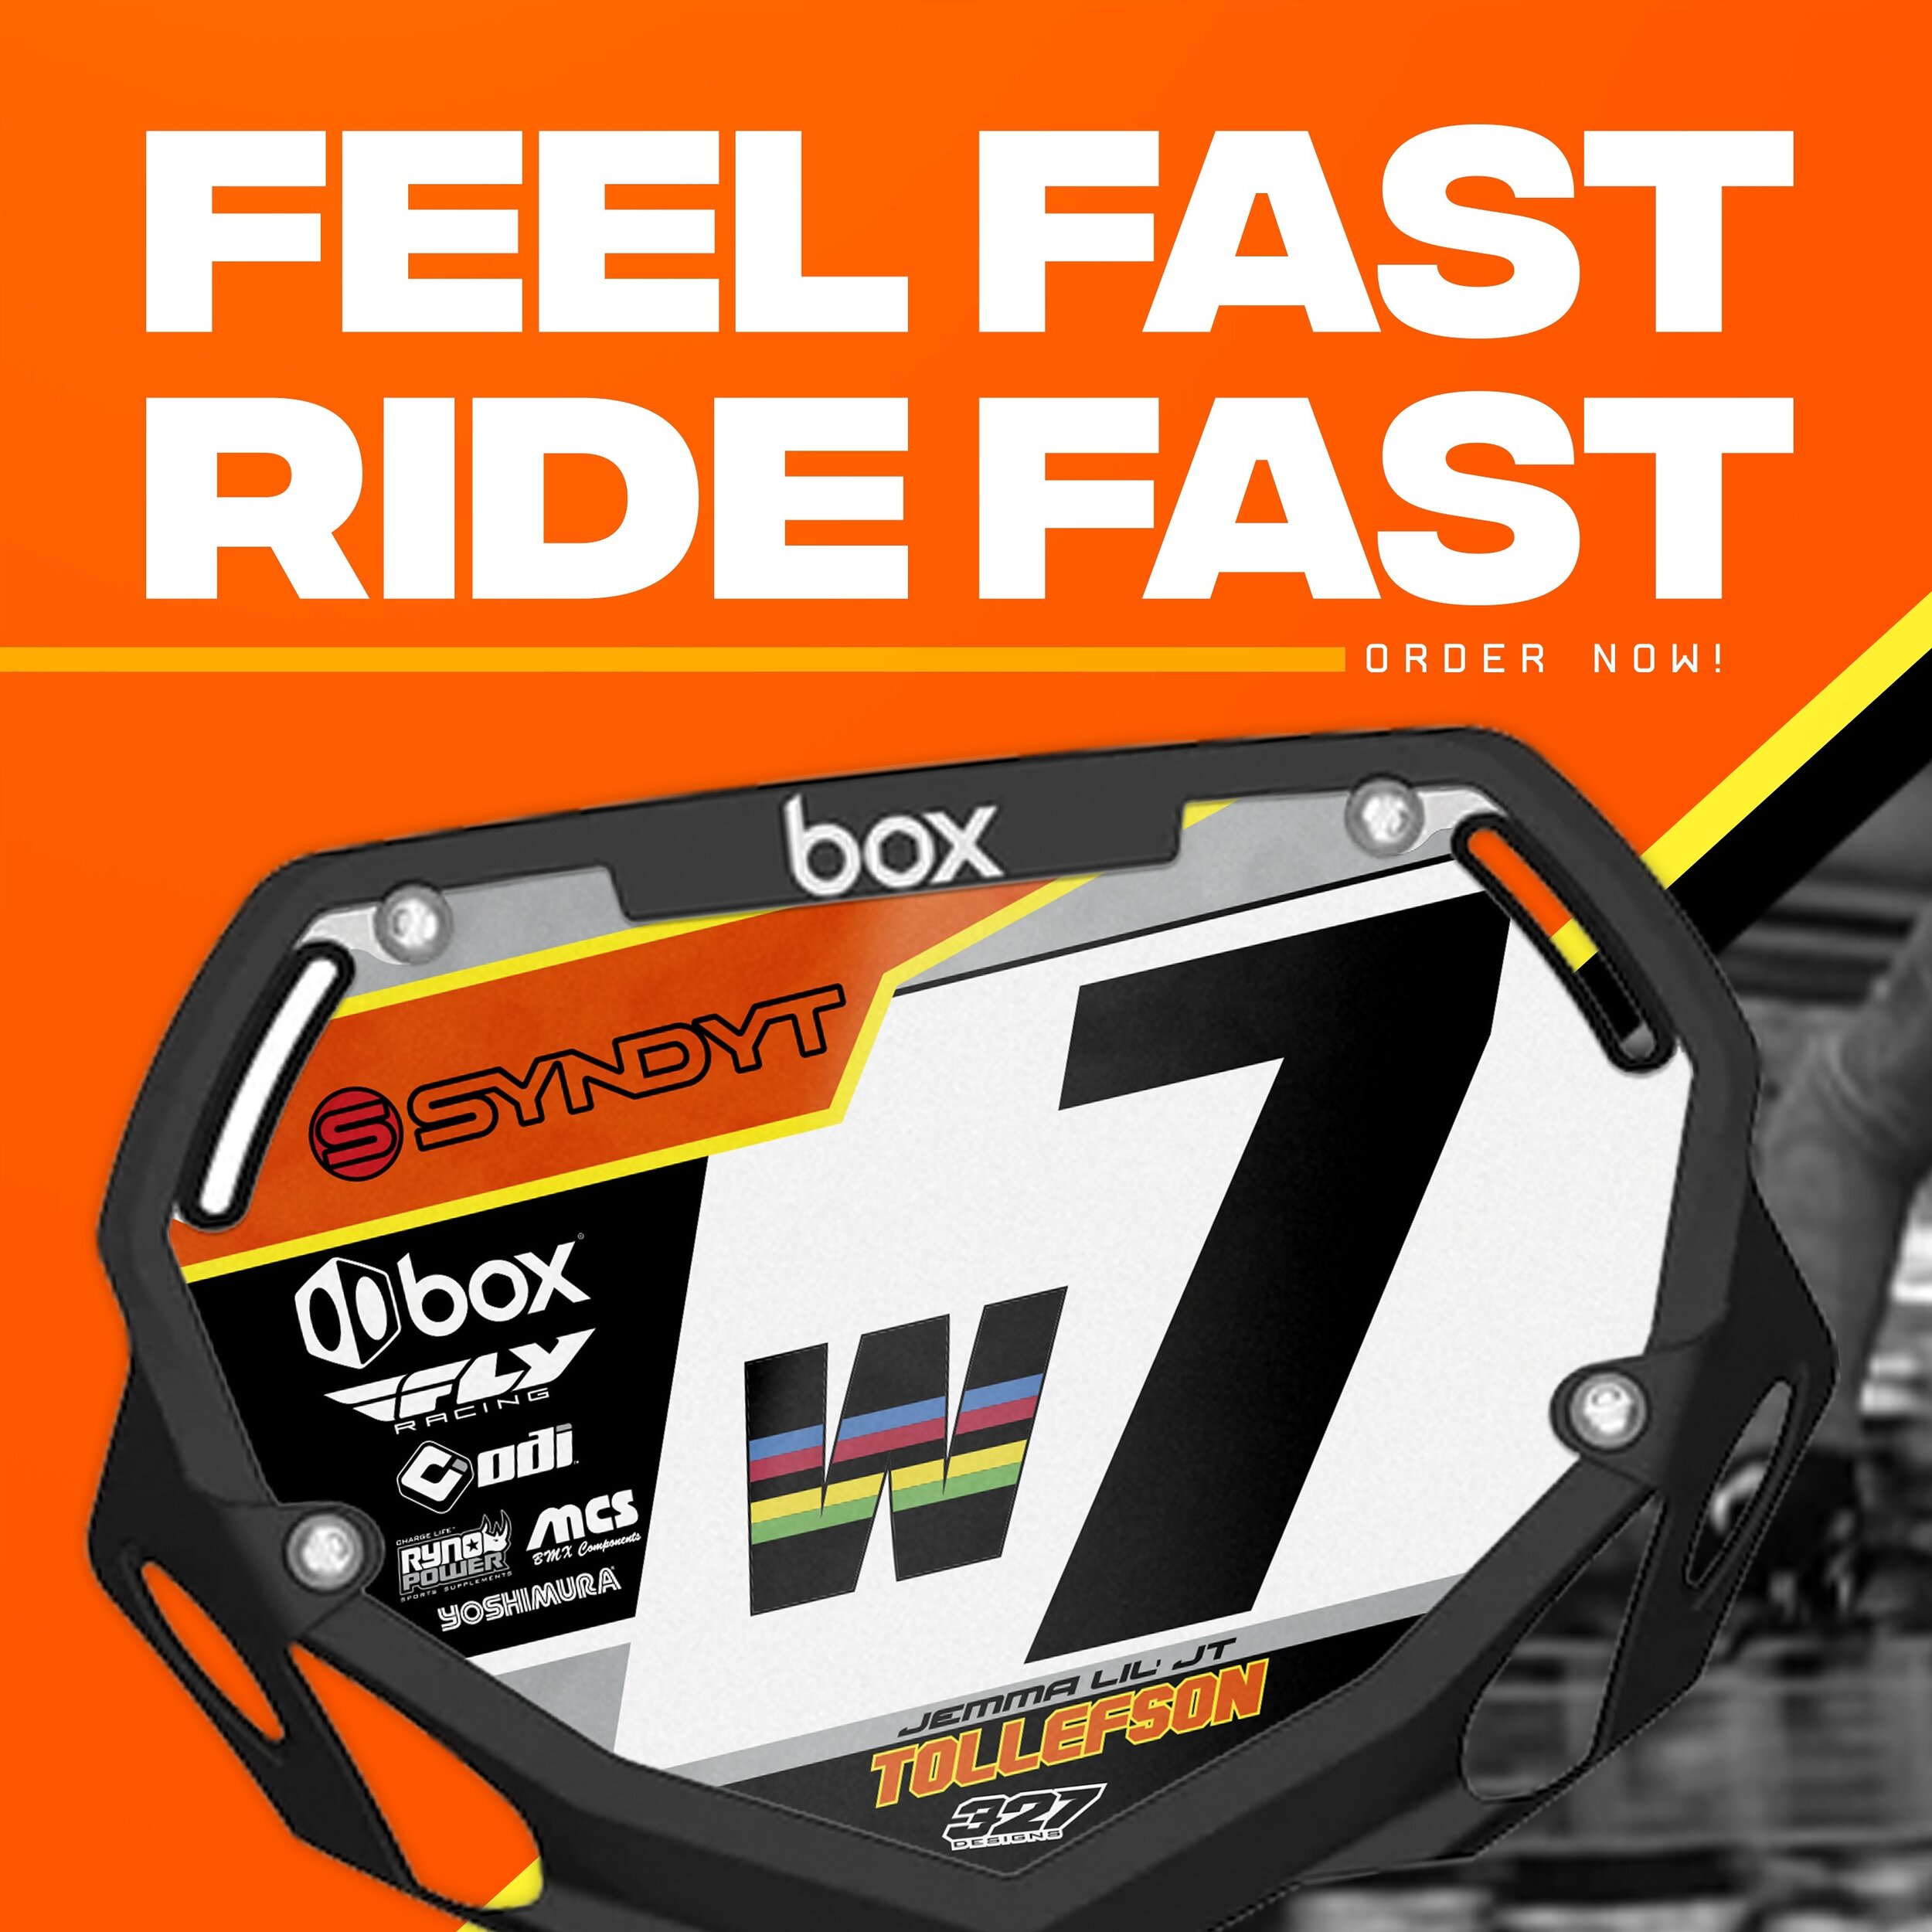 Feel Fast Ride Fast!! It&rsquo;s all in the confidence and @jemmatollefson has that on lock 🔒 #327Army

Available on our website 🖥️ 327Designs.com

&mdash;

#bmx #bmxracing #vinyl #usabmx #designs #racing #bikes #illustrator #graphicdesign #custom 